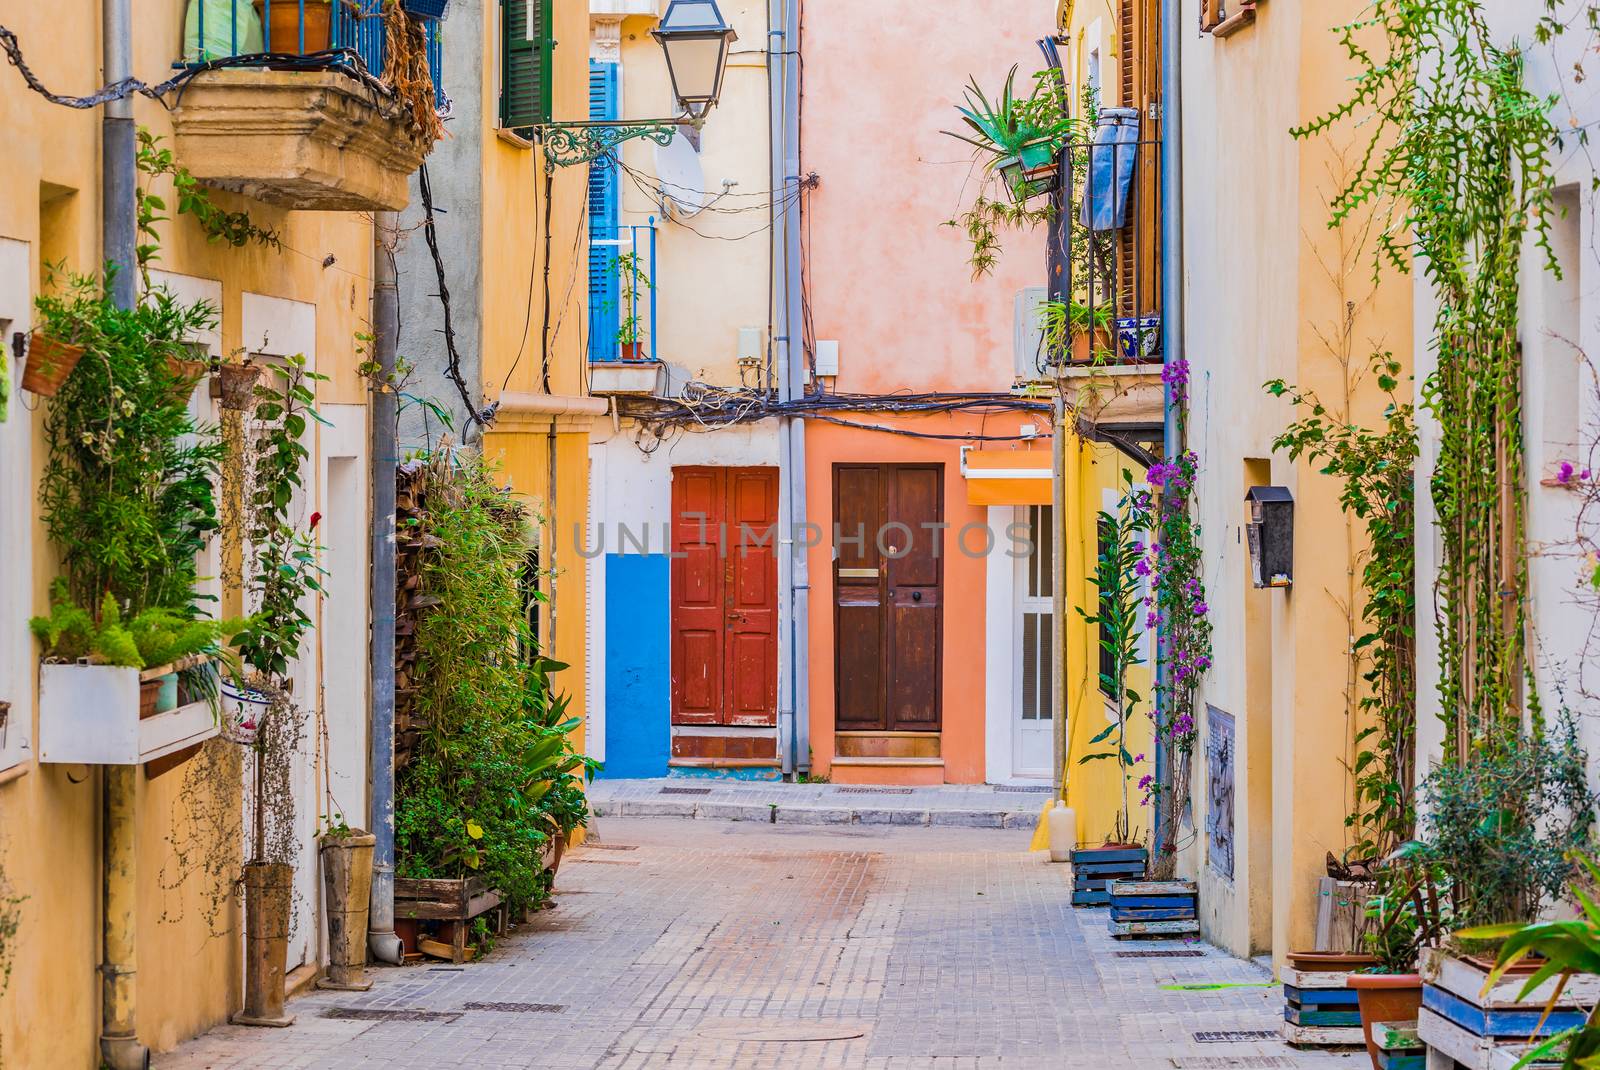 View of colorful houses in Palma de Mallorca city, Spain Balearic islands